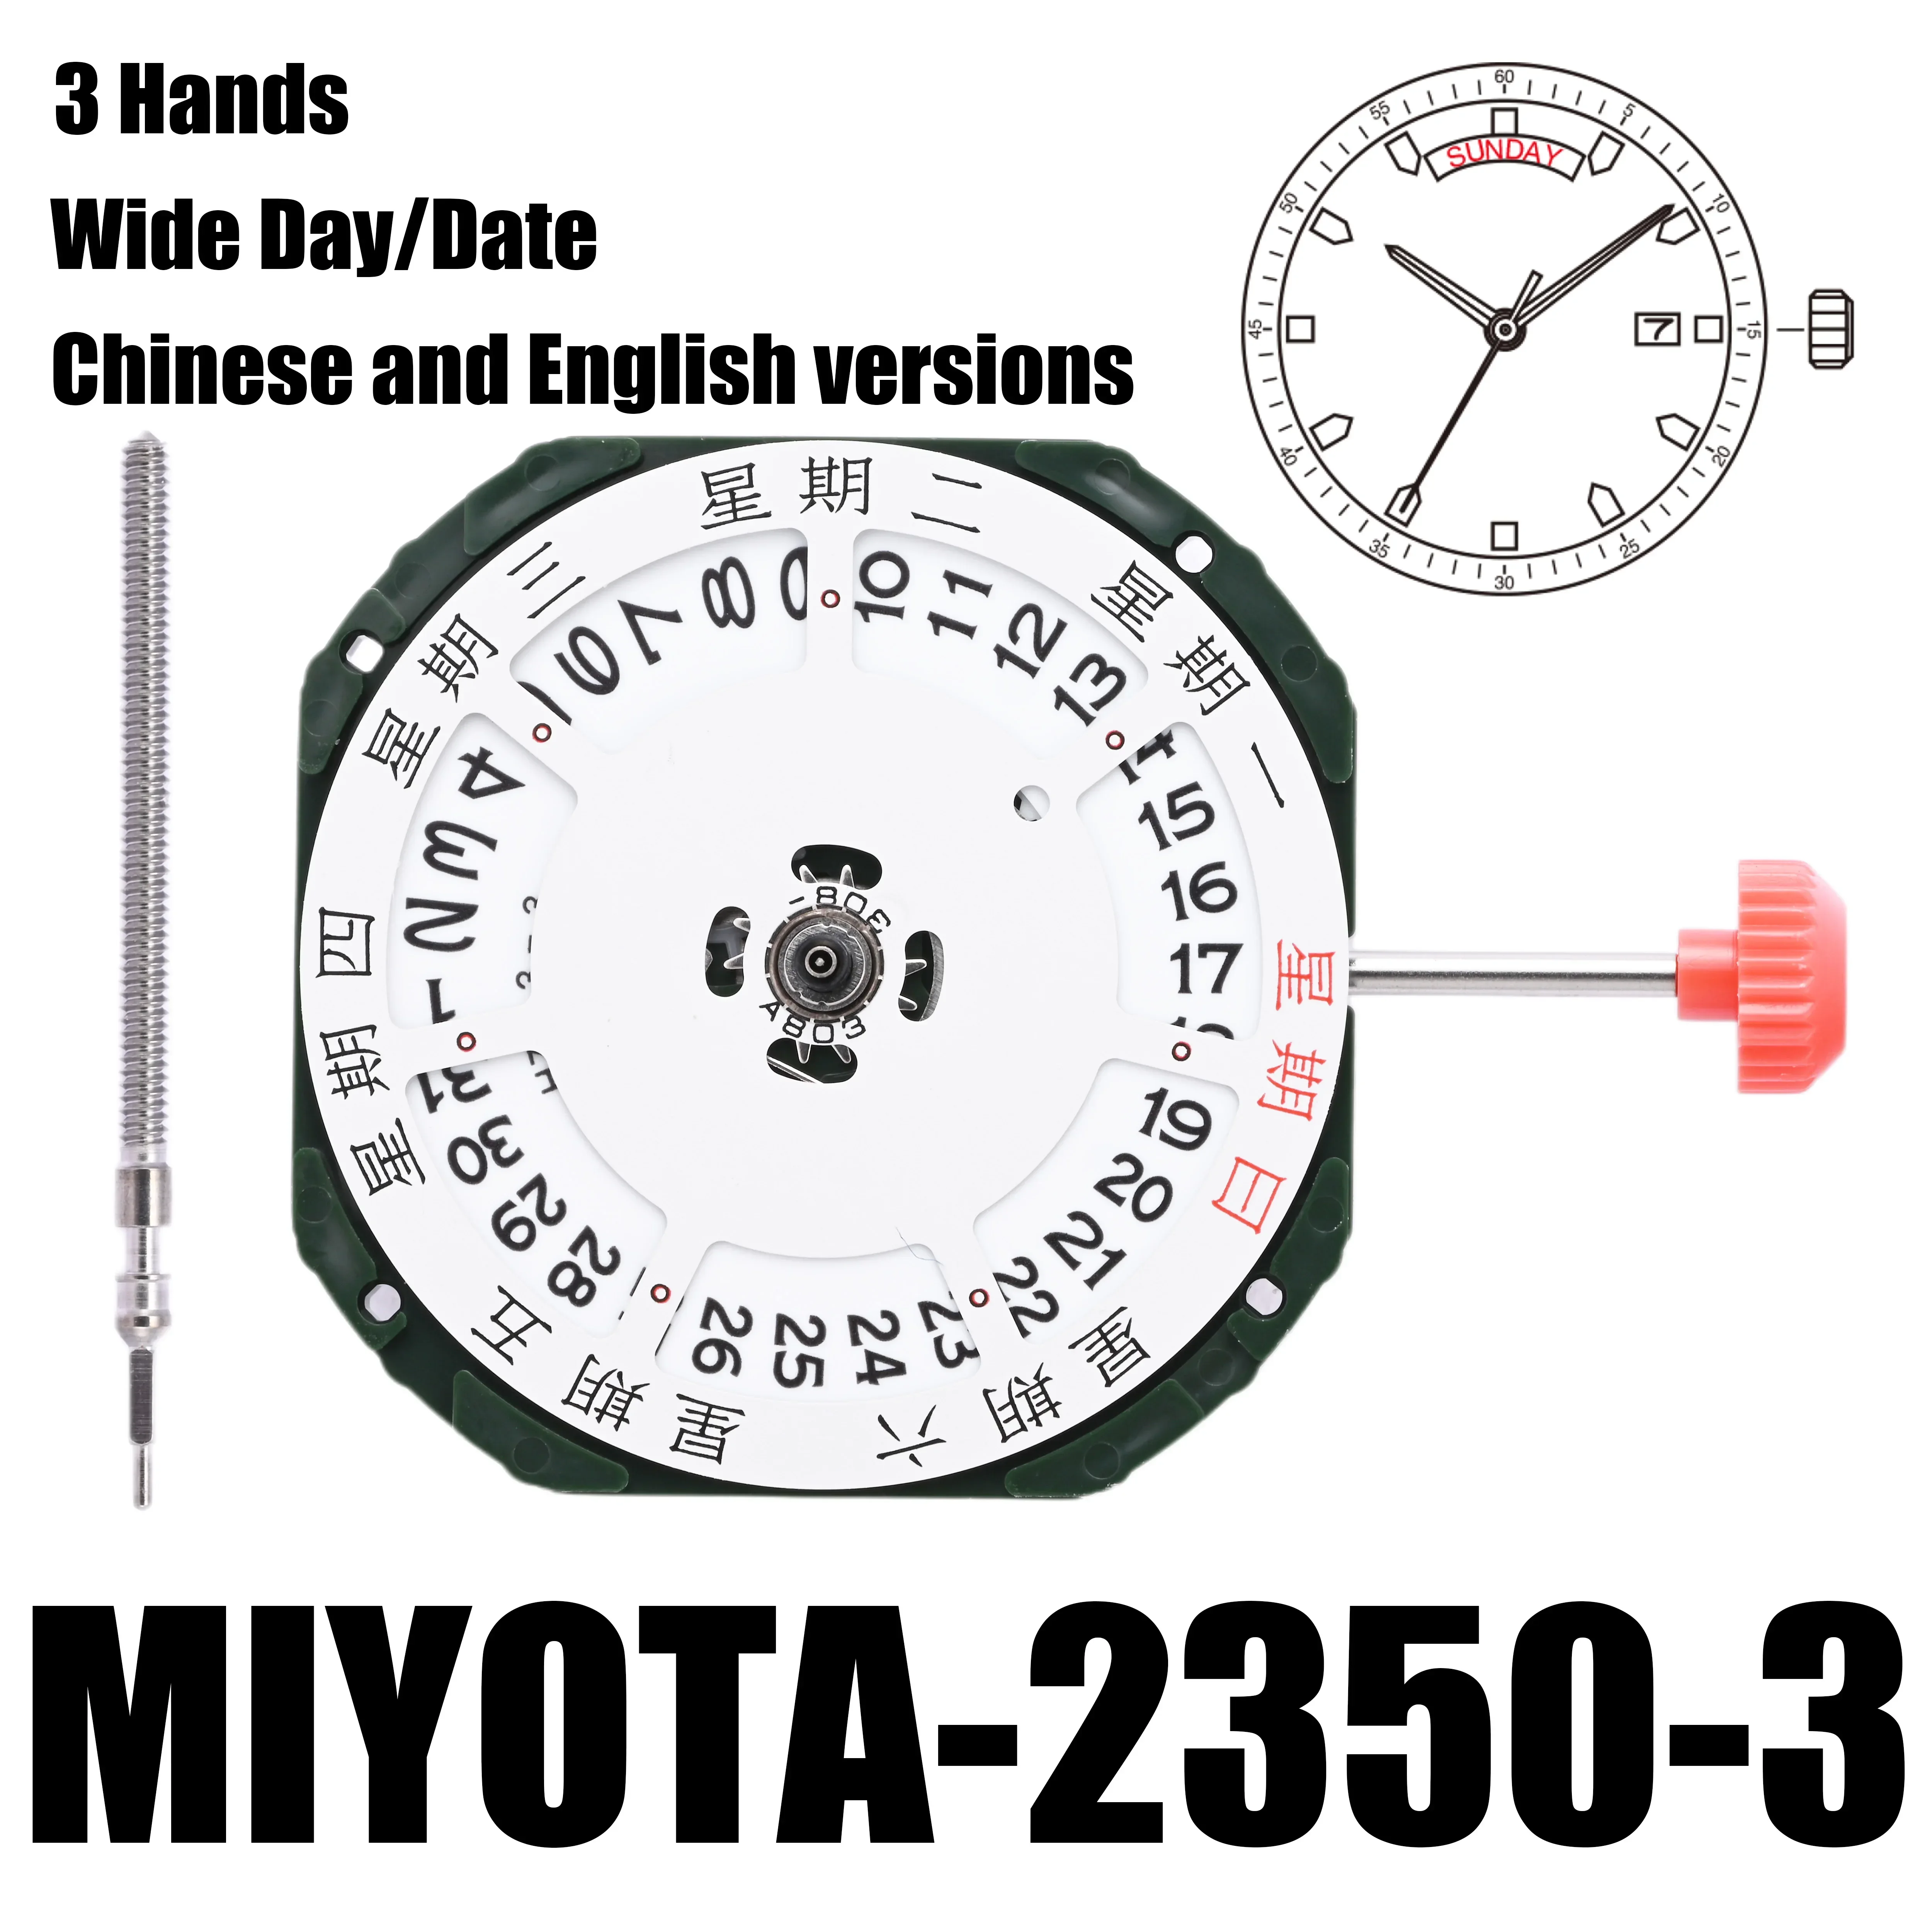 

Miyota 2350 Standard｜ Quartz Watch Movement With Date & Day 3 Hands Wide Day/Date Size:11 1/2''' Heigh:4.15mm